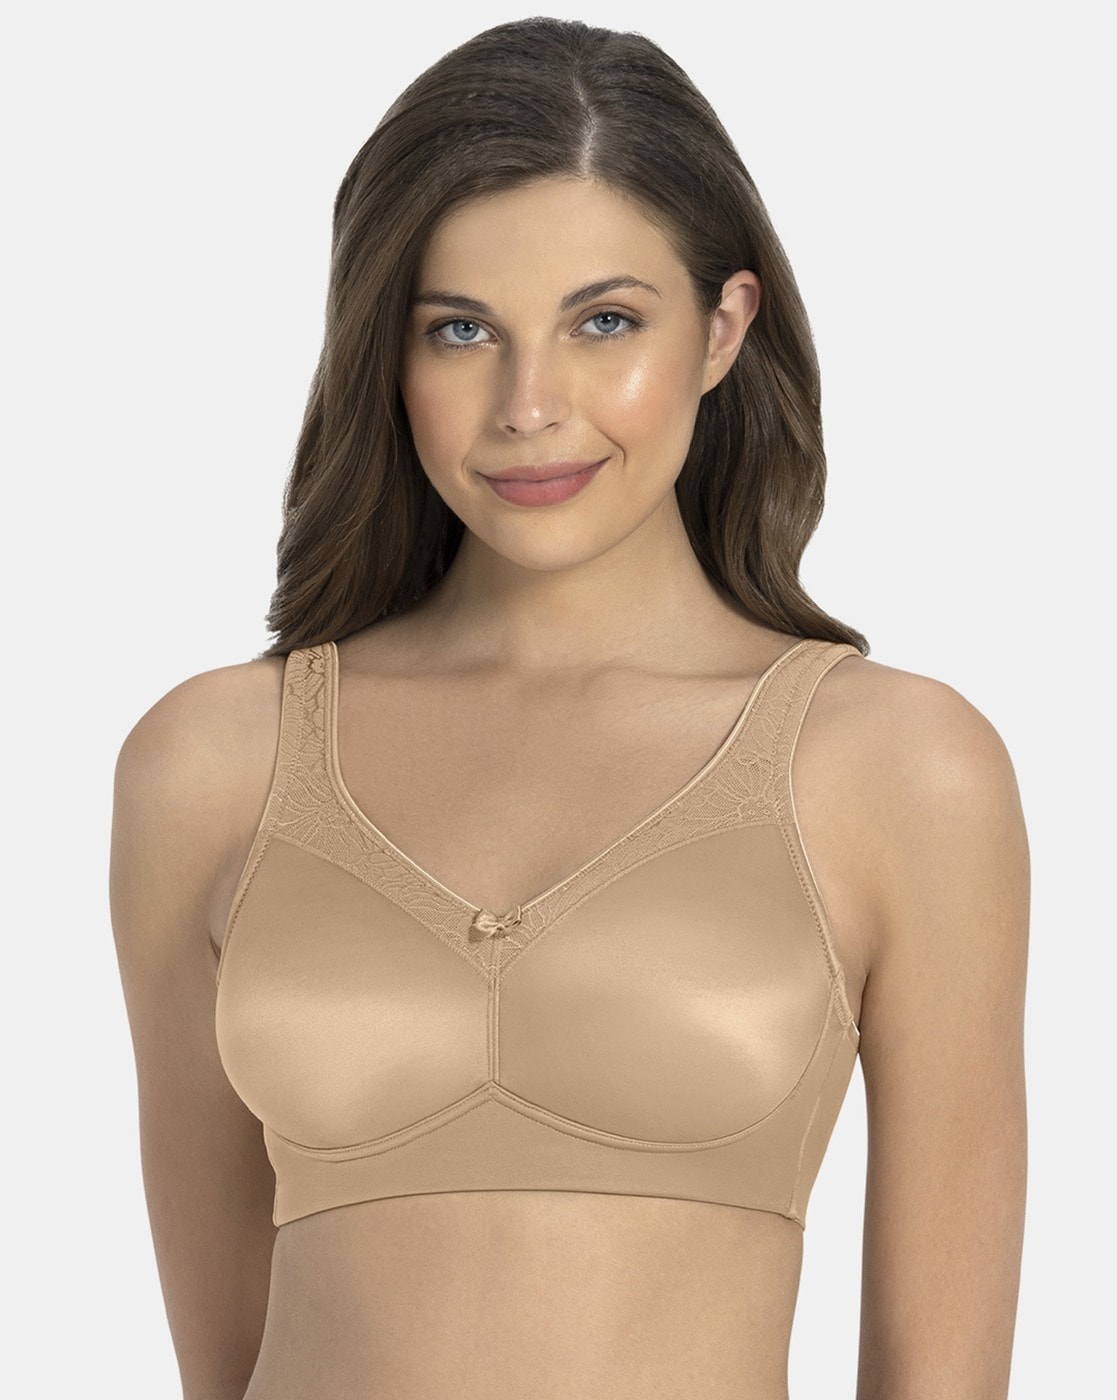 Buy Amante Cloudsoft Padded & Non Wired Bra - Beige online